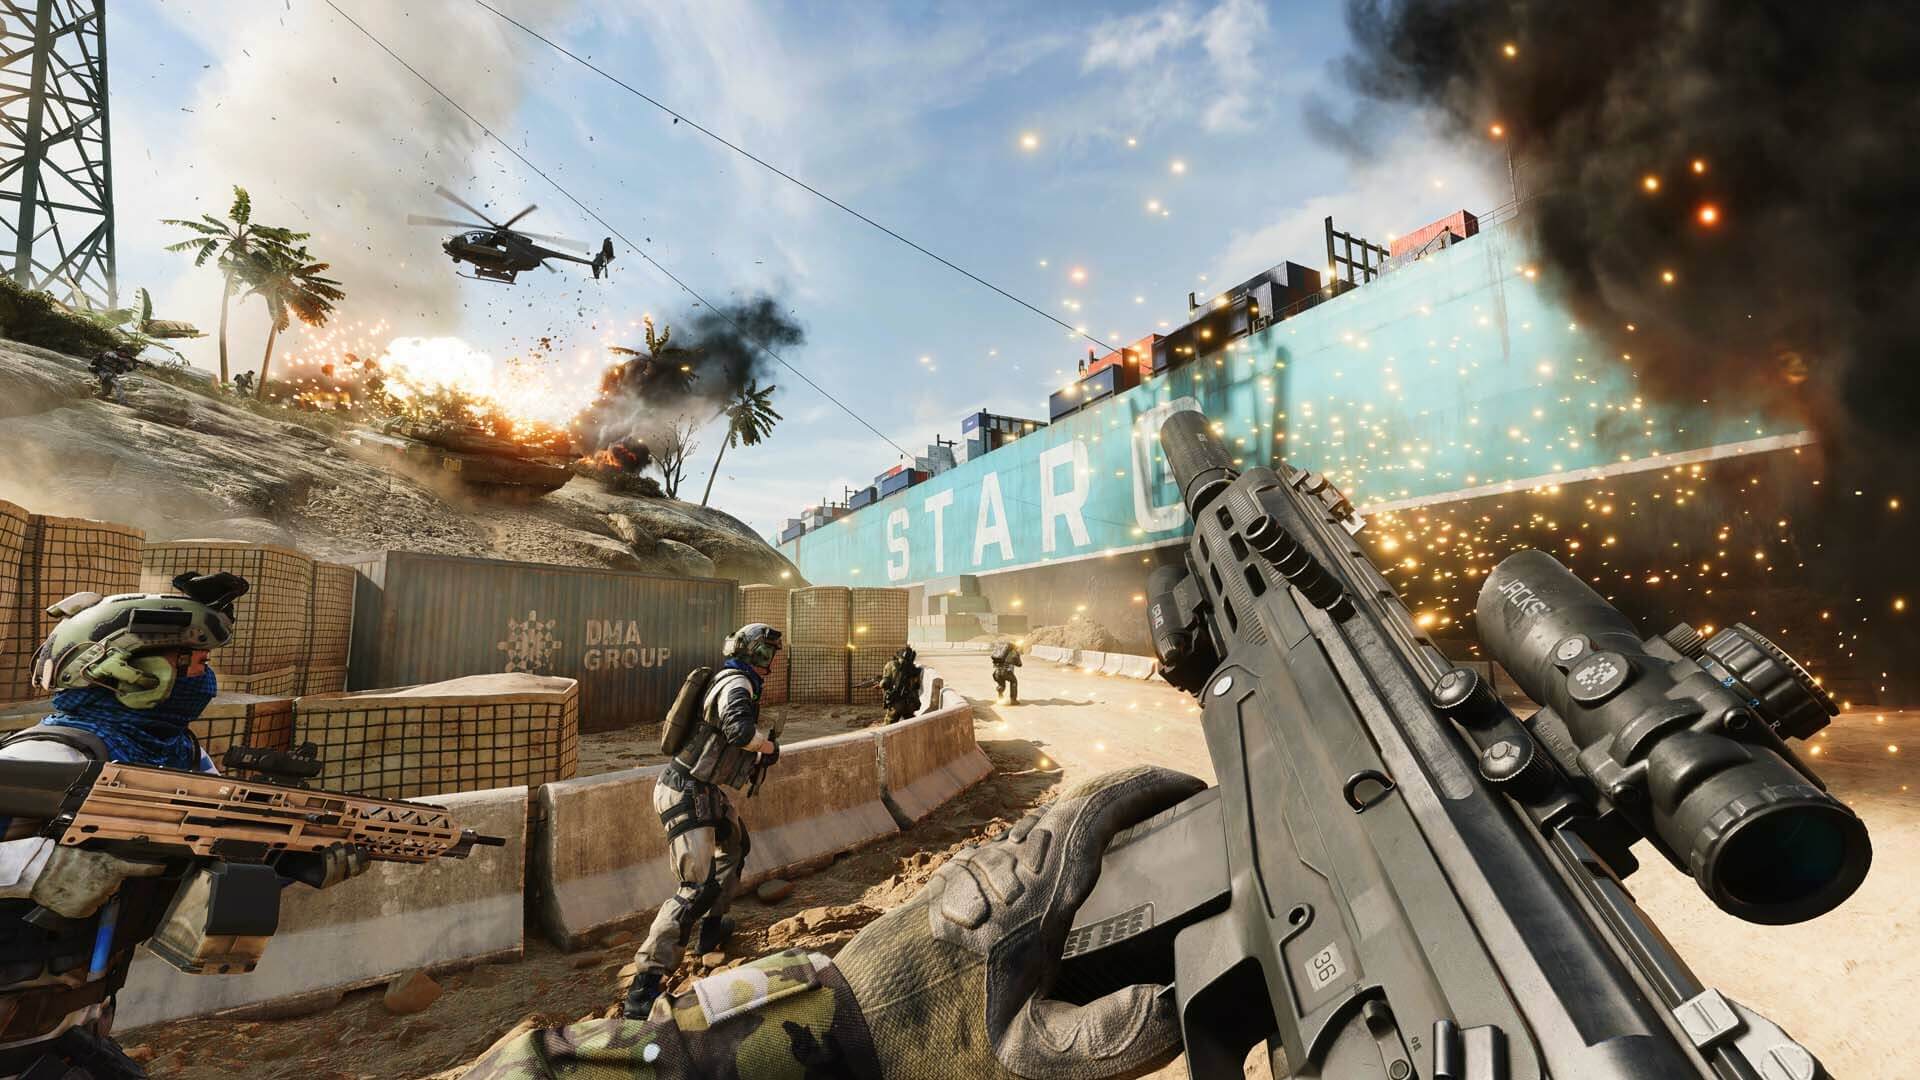 The player charging alongside comrades on a battlefield in Battlefield 2042